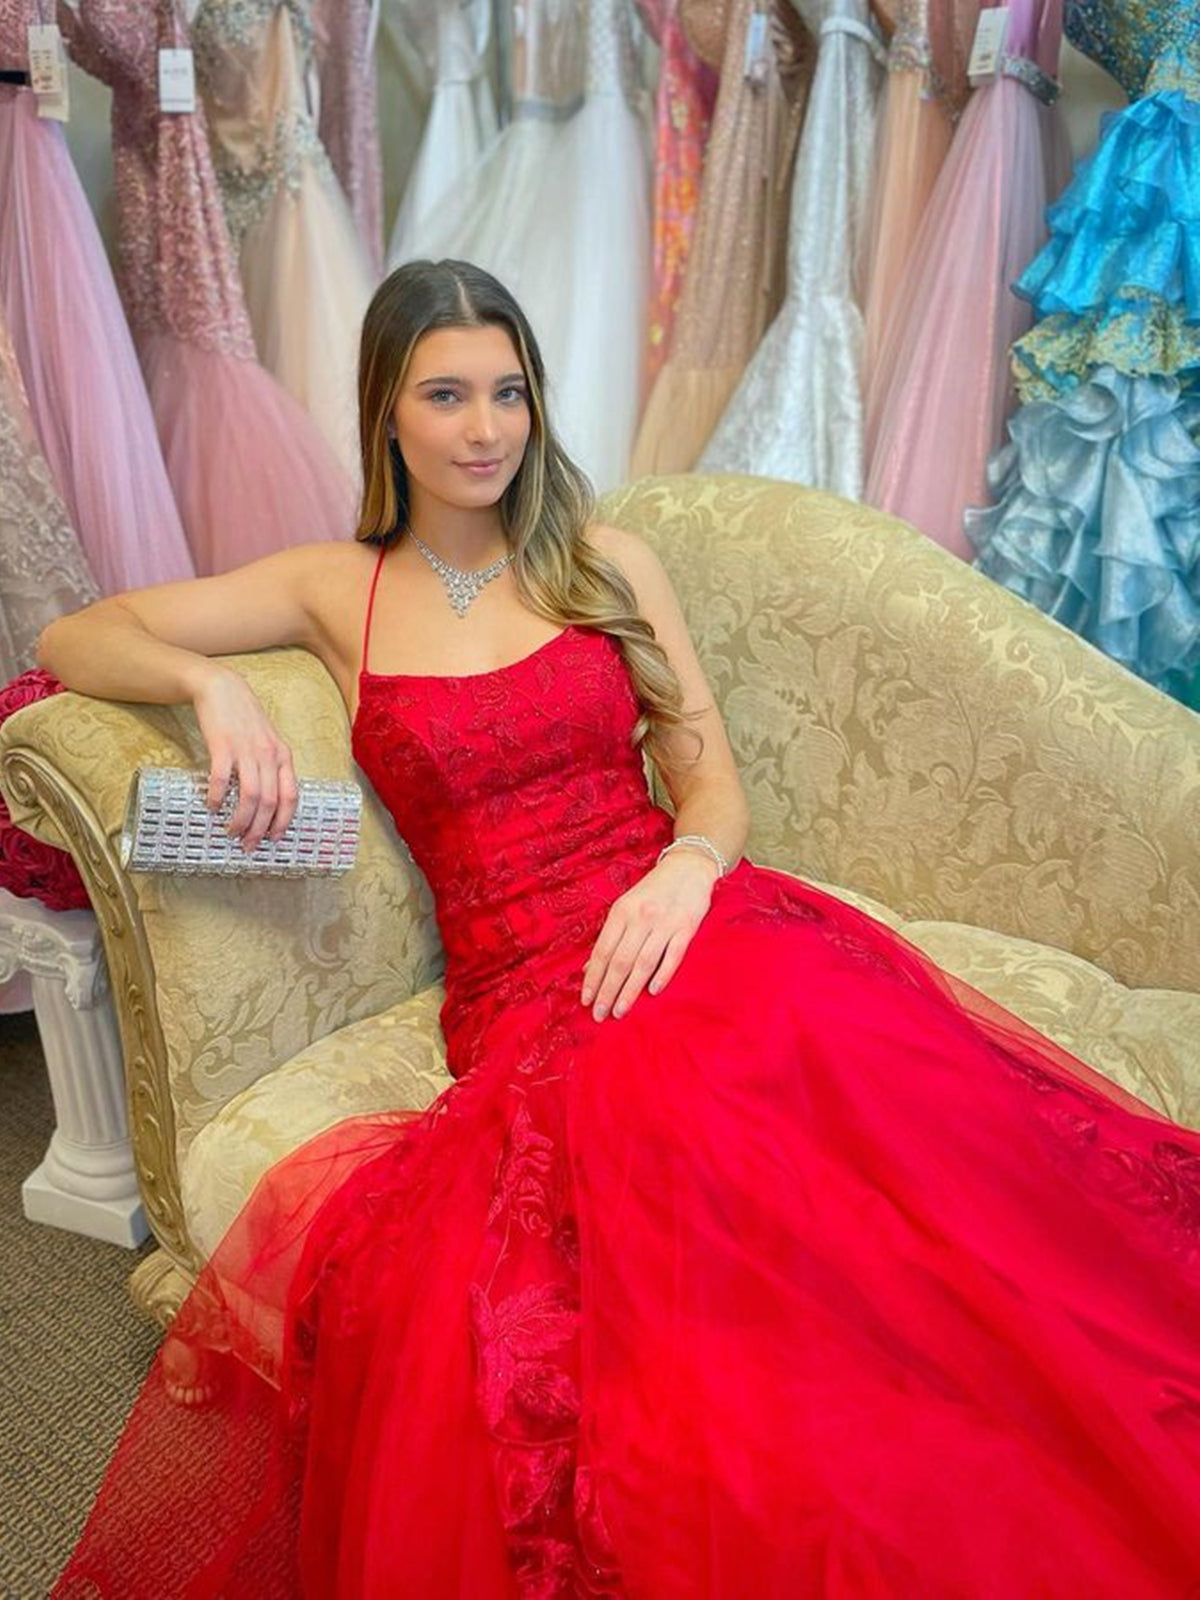 Mermaid Backless Red Lace Long Prom Dresses, Mermaid Red Formal Dresses, Red Lace Evening Dresses 